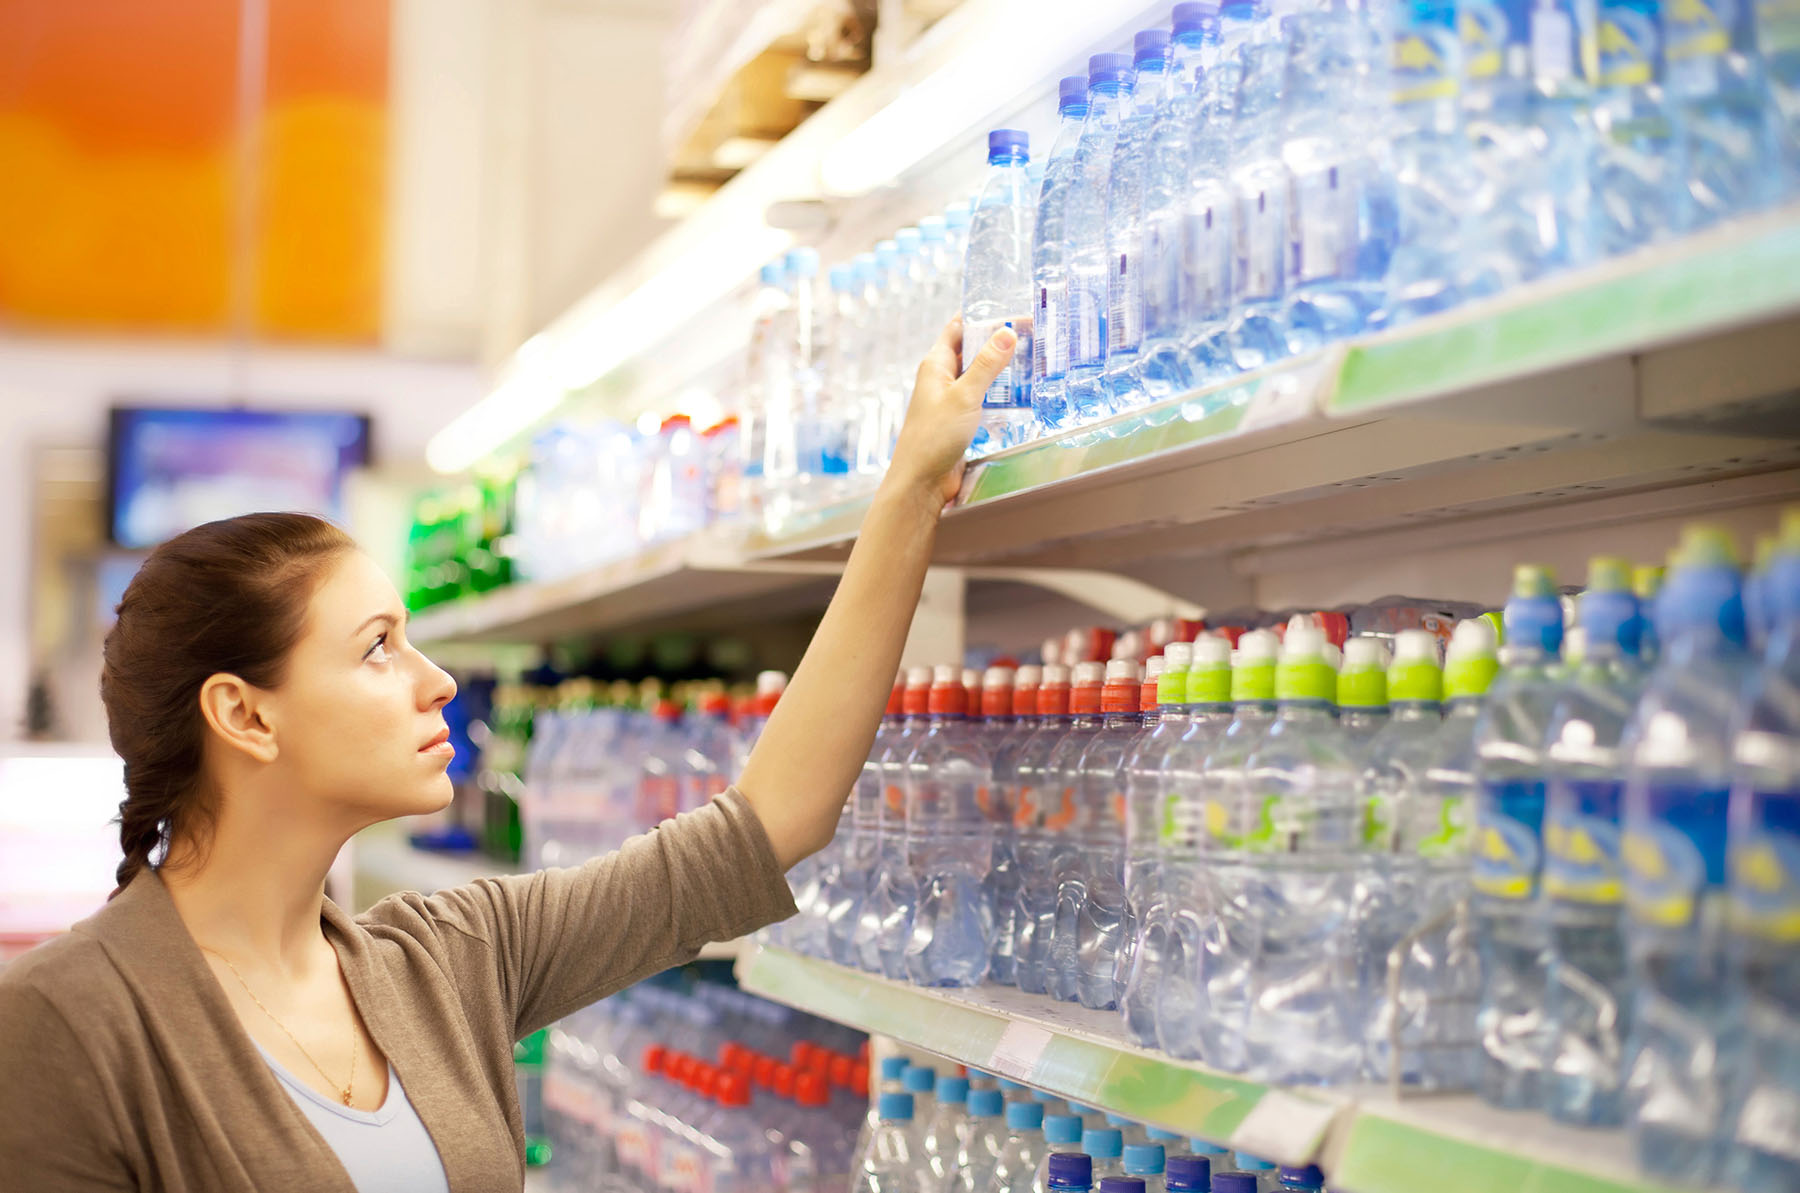 Woman reaches for water bottle on top shelf at grocery store.